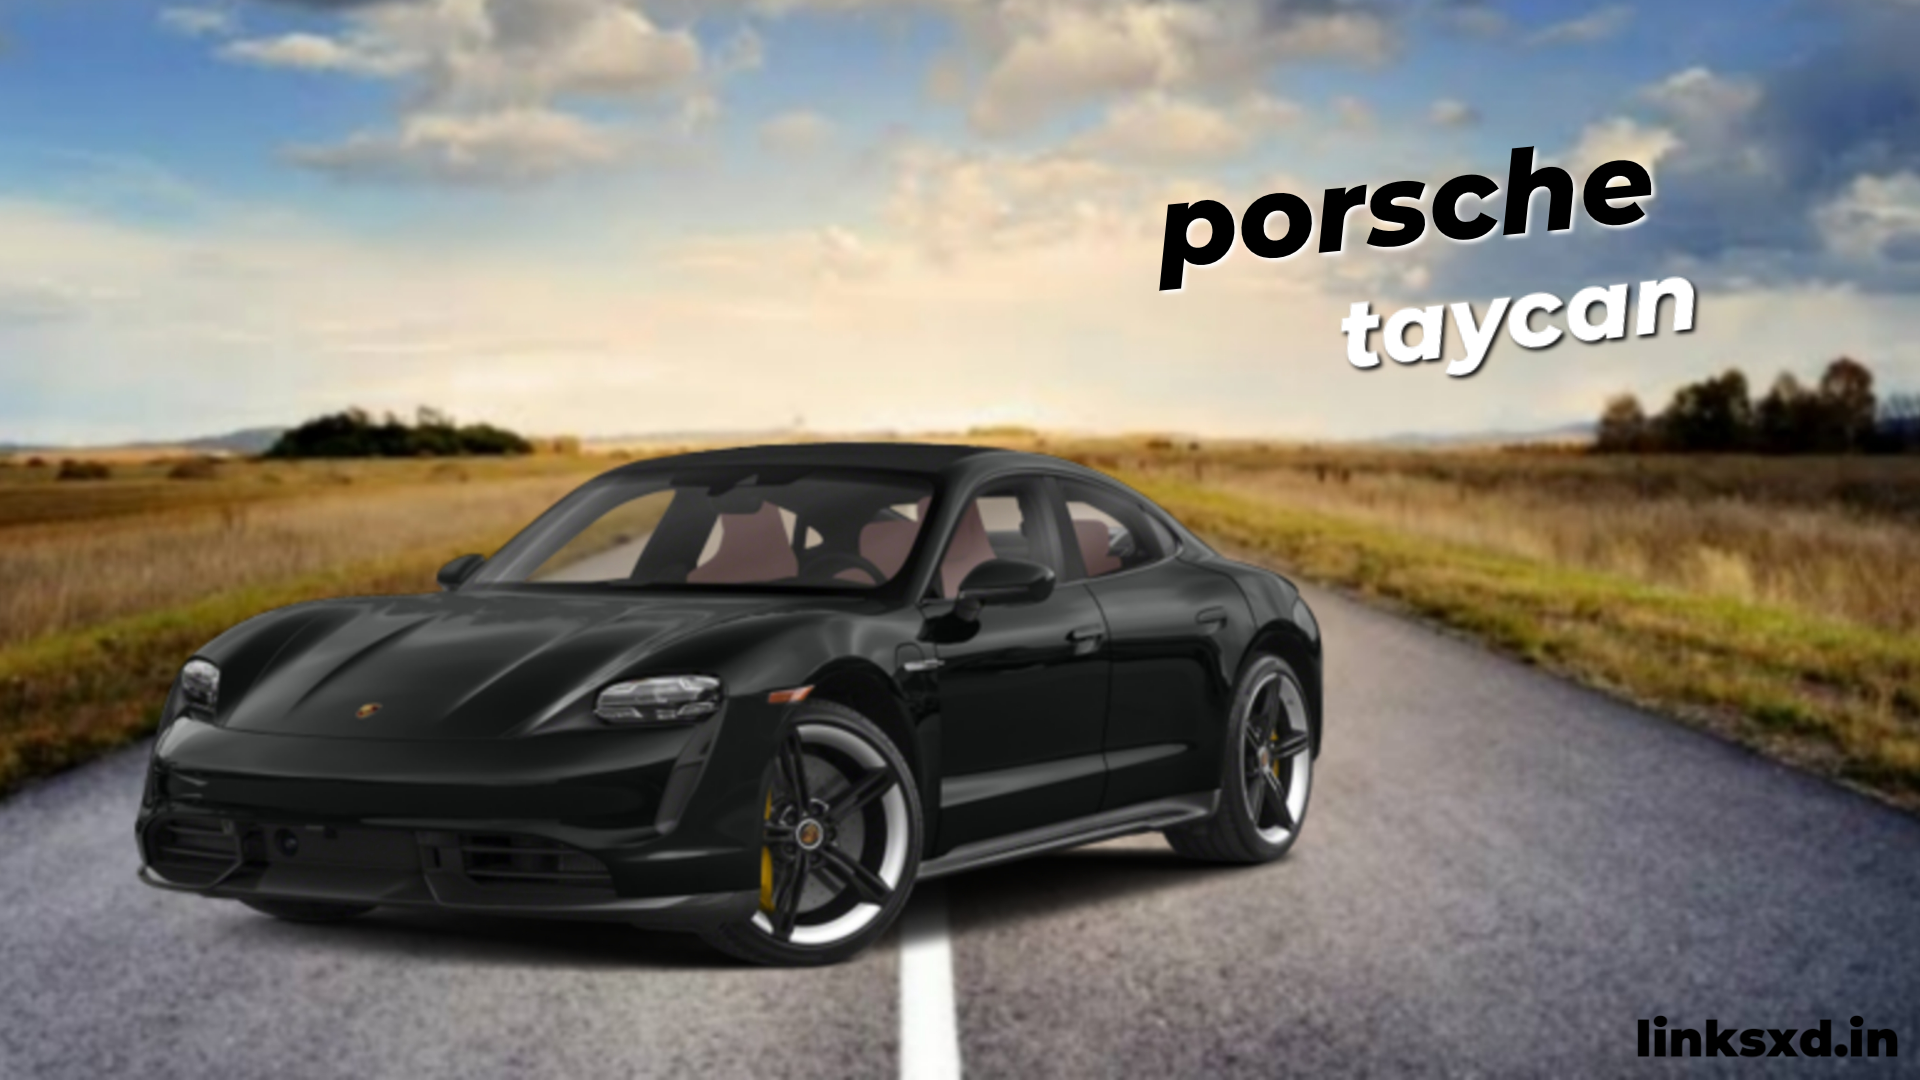 For an energetic driving experience, choose the Taycan GTS. Featuring Porsche-designed overboost technology to temporarily boost power, sports drive mode to optimize performance, and a rear-wheel steering system designed to increase agility - plus aggressive front bumper with carbon fiber accents and bold skirts that communicate its sporty DNA - this vehicle makes an impressionful statement of athleticism and power.